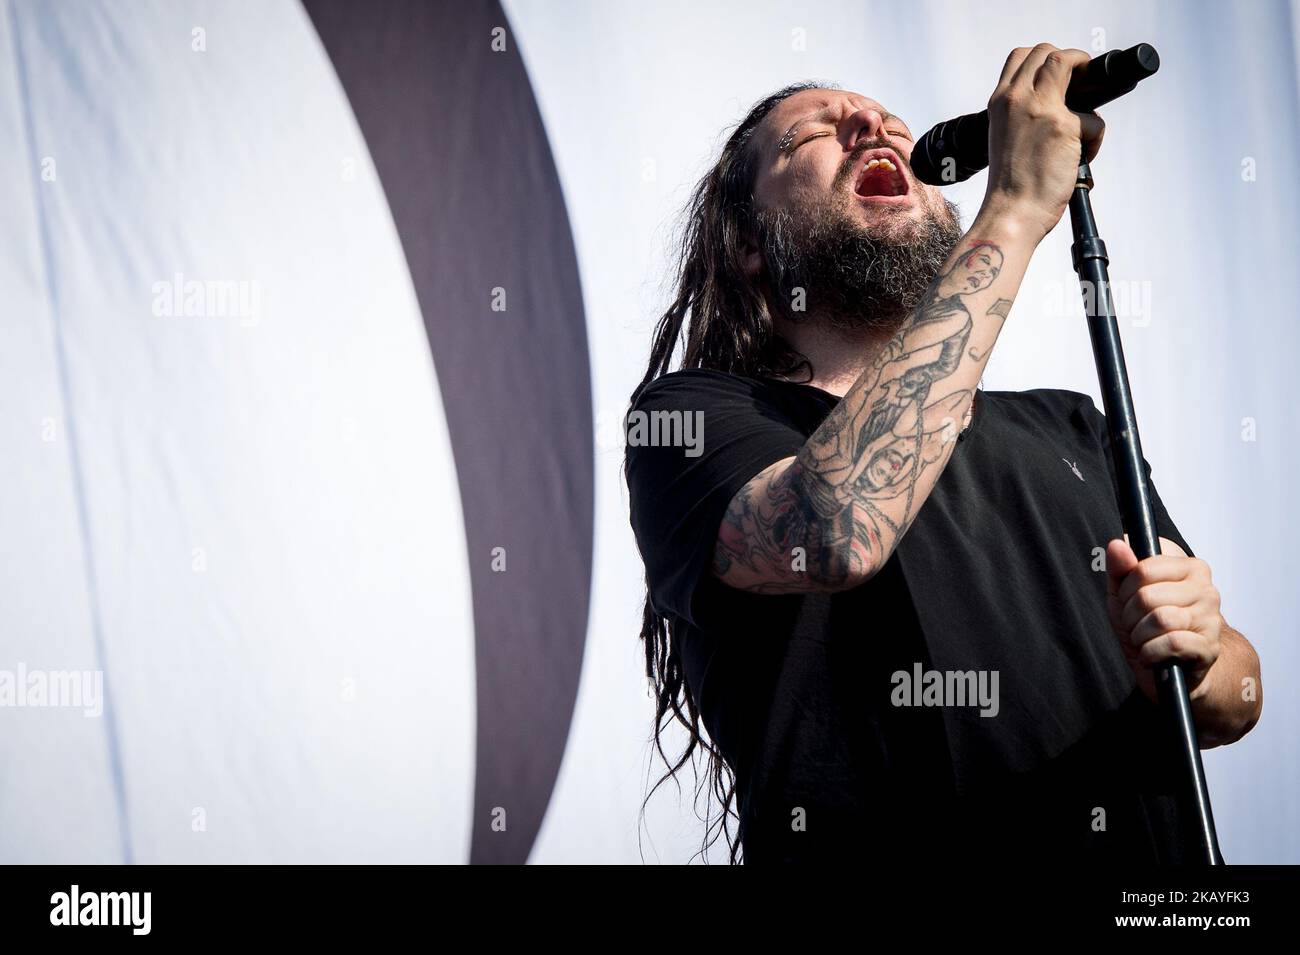 American singer and musician Jonathan Davis best known as the lead vocalist and frontman of Nu Metal band Korn performs live on stage during Firenze Rocks festival at Visarno Arena , Florence, Italy on 16 June 2018. (Photo by Giuseppe Maffia/NurPhoto) Stock Photo